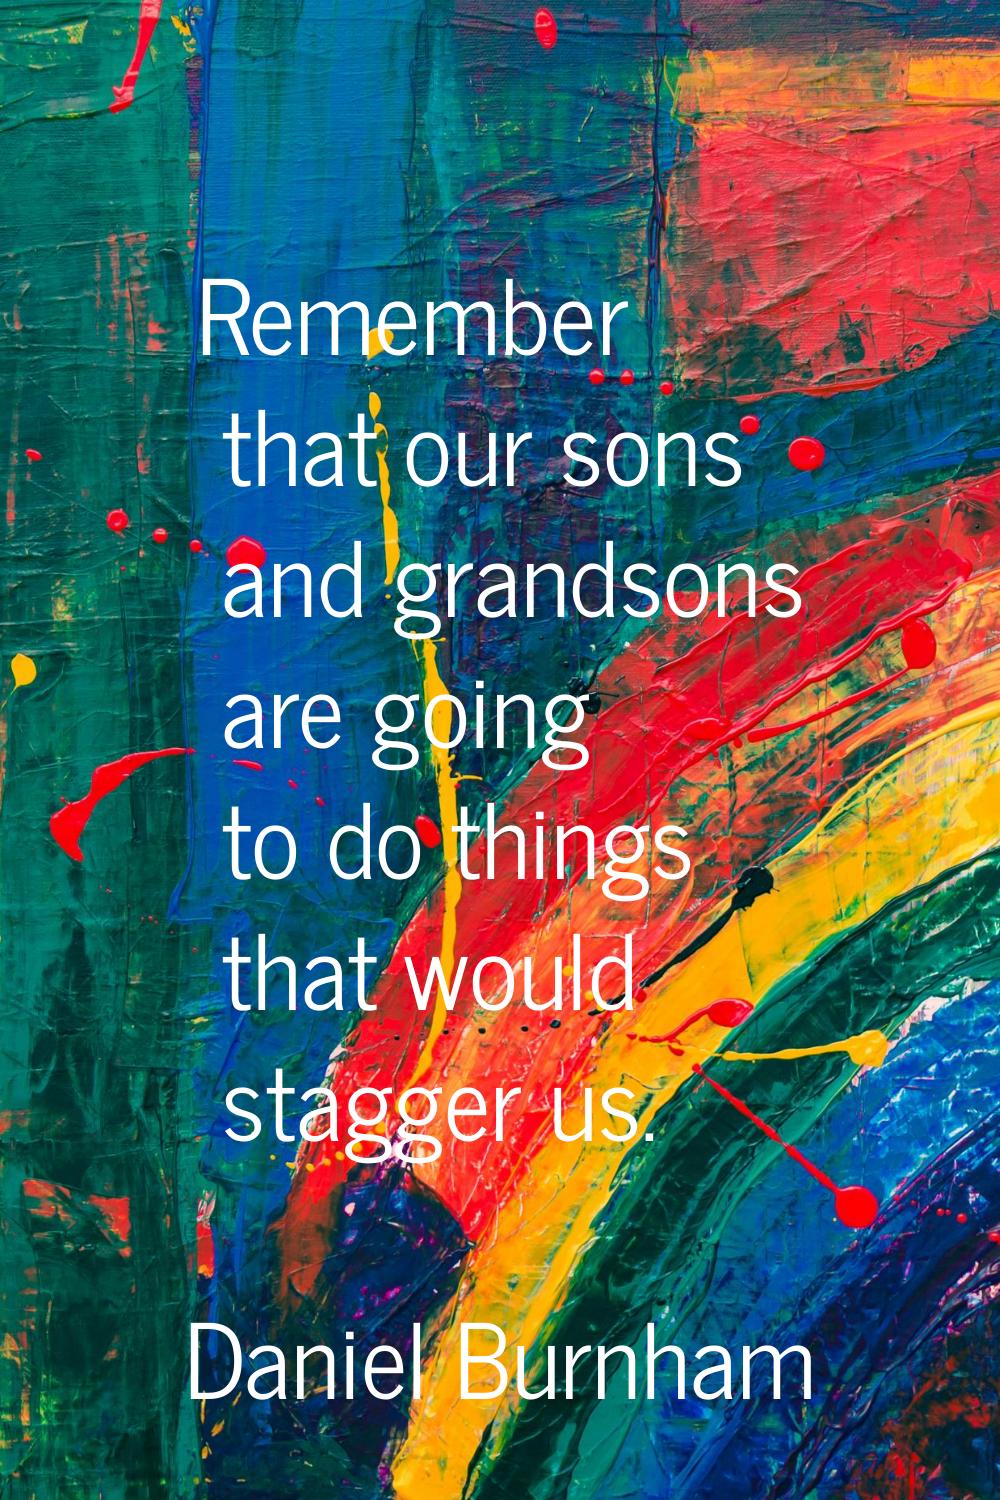 Remember that our sons and grandsons are going to do things that would stagger us.